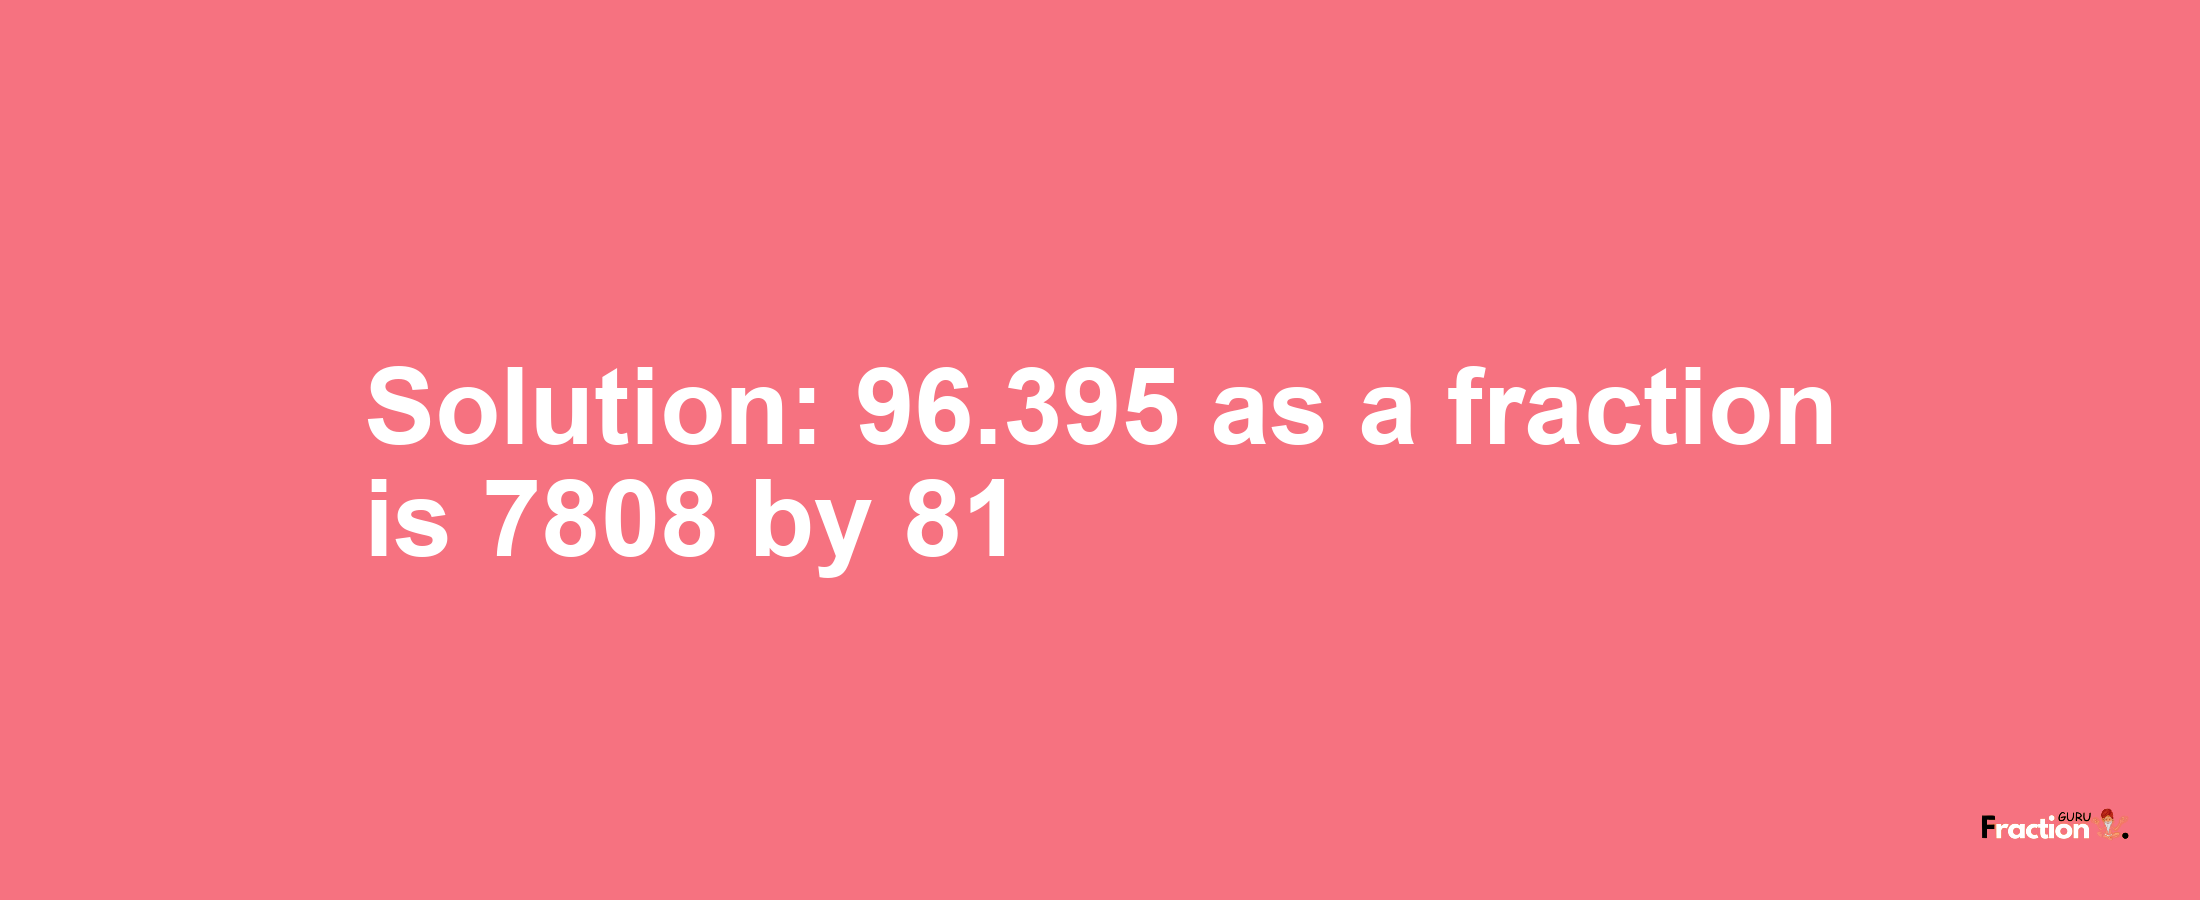 Solution:96.395 as a fraction is 7808/81